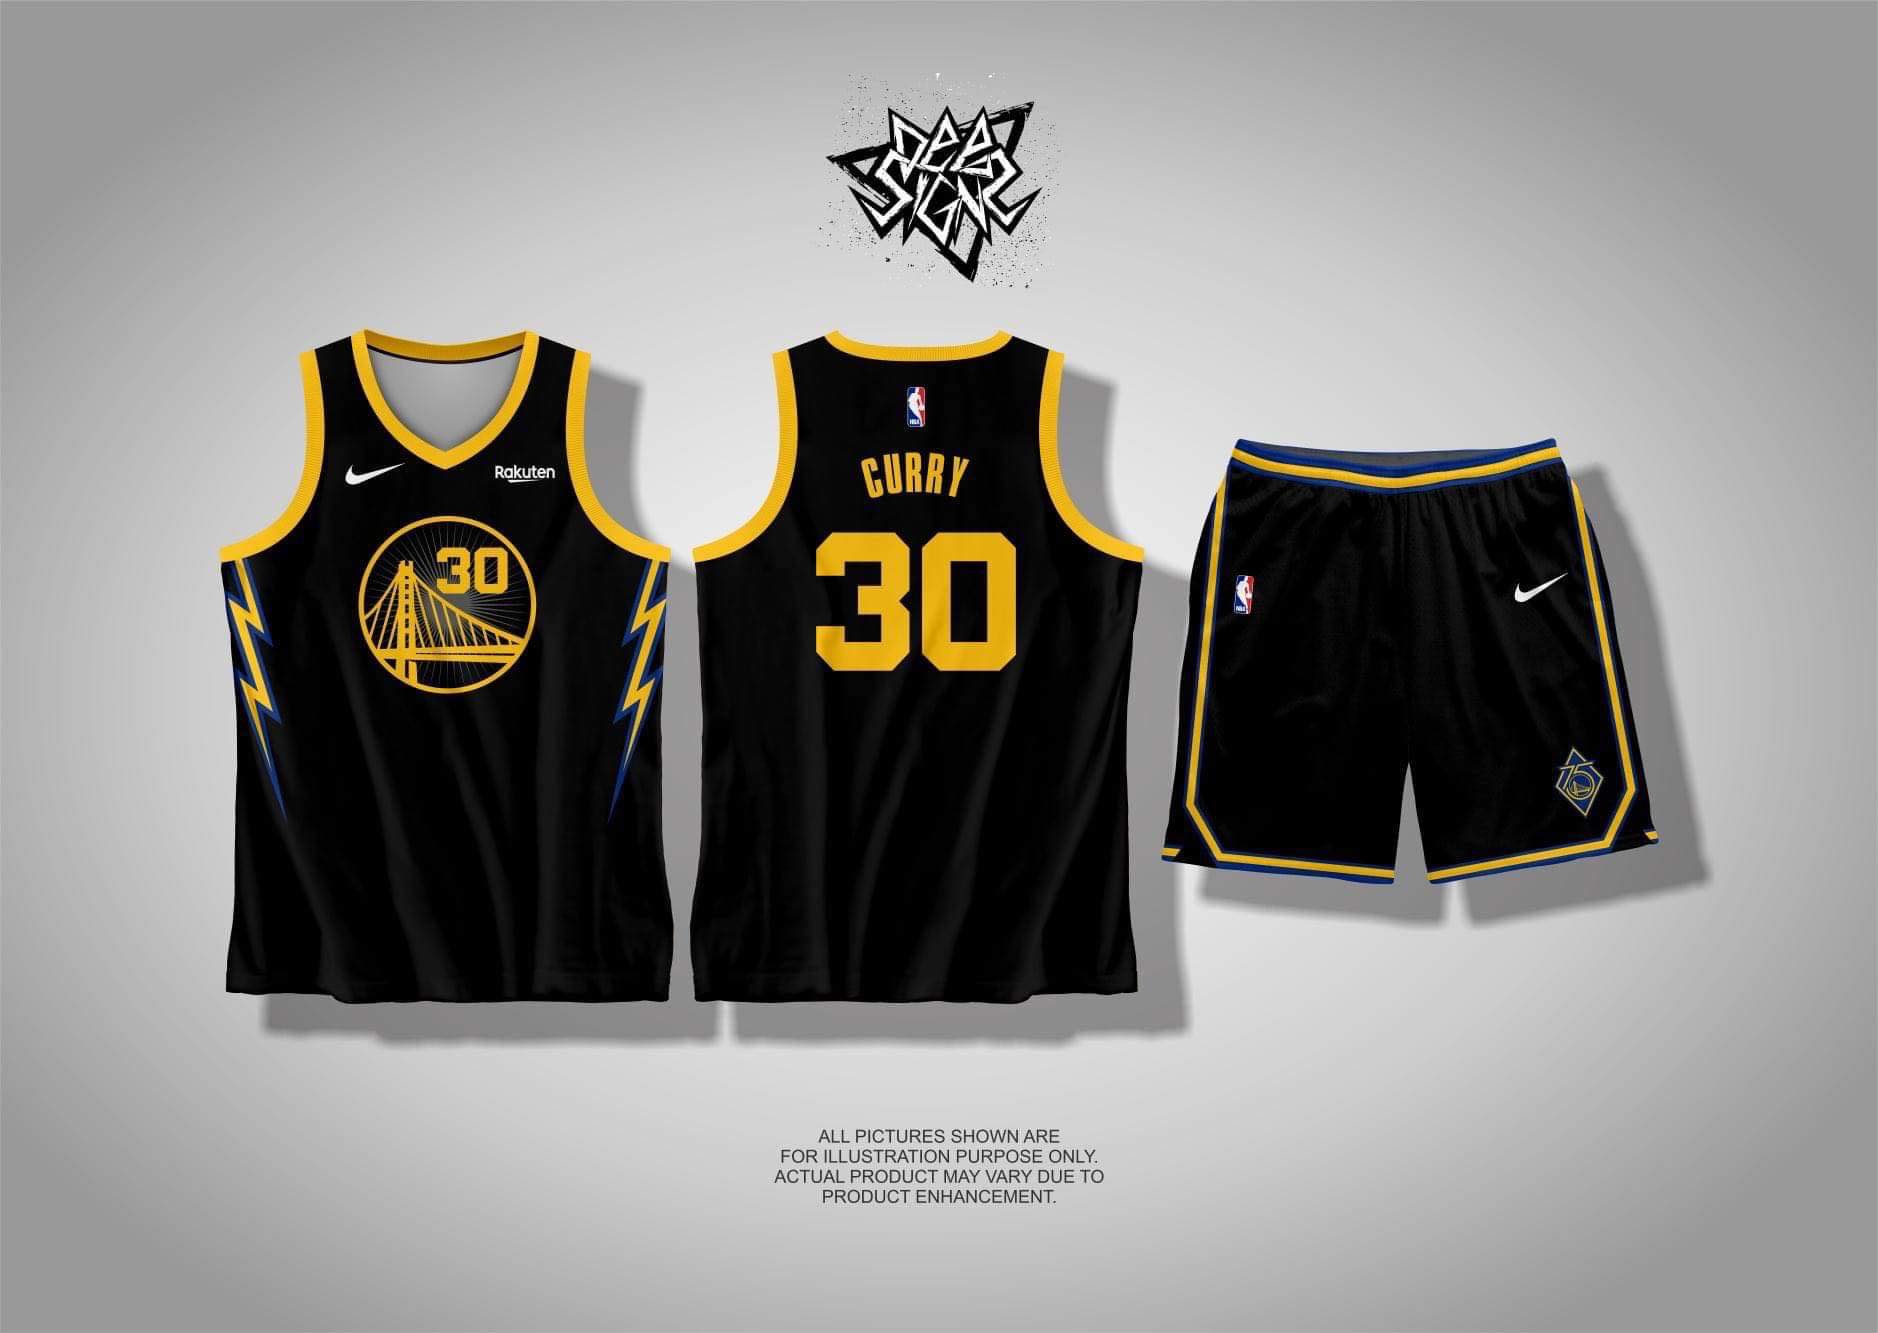 NEW BASKETBALL GSW 22 JERSEY FREE CUSTOMIZE OF NAME AND NUMBER ONLY full  sublimation high quality fabrics/ trending jersey